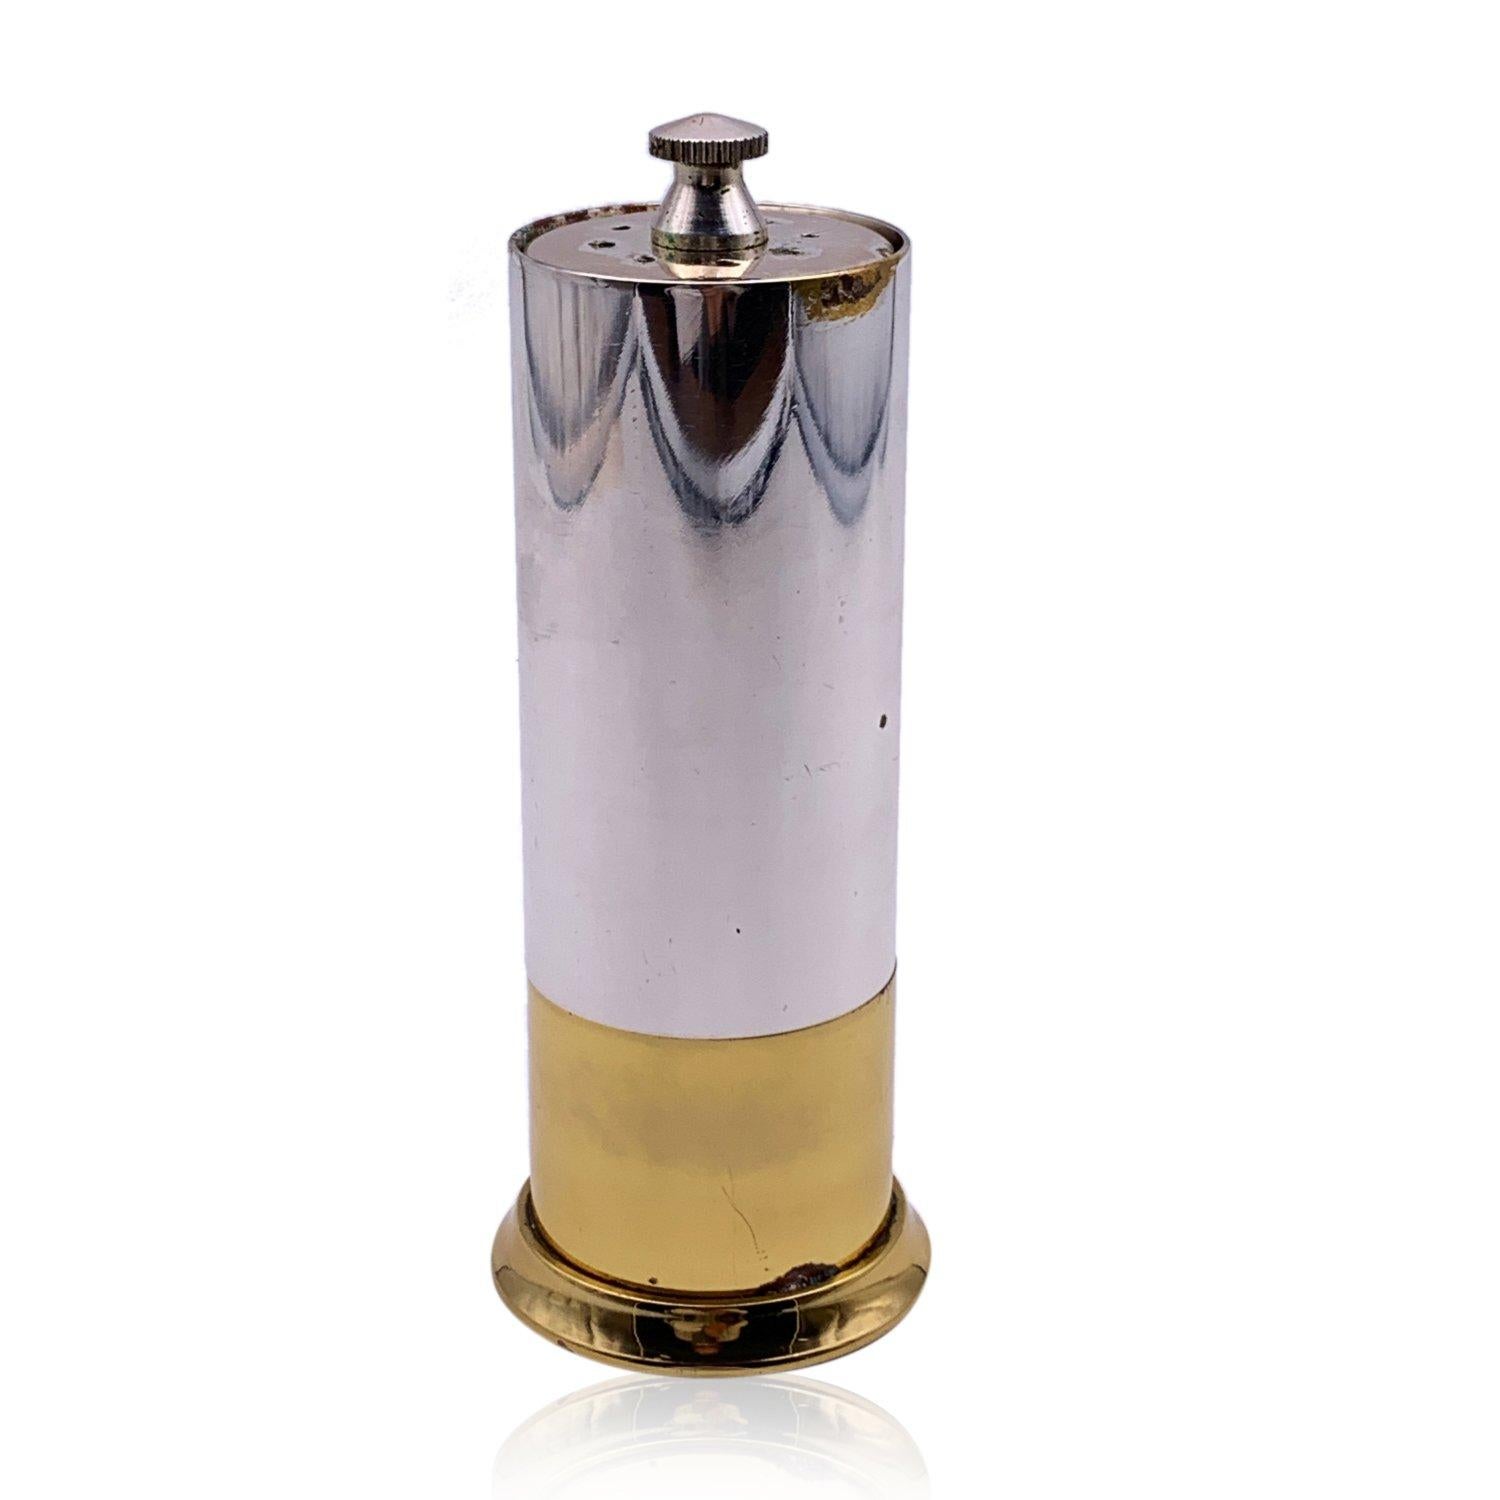 Vintage GUCCI Pepper Mill/Salt Shaker. Silver and gold metal GG logo on the front. Marked 'Gucci - Made in Italy'. Height: 5.5 inches - 14 cm. Width: 1.75 inches - 4.5 cm Details MATERIAL: Metal COLOR: Silver MODEL: - GENDER: Unisex Adults COUNTRY